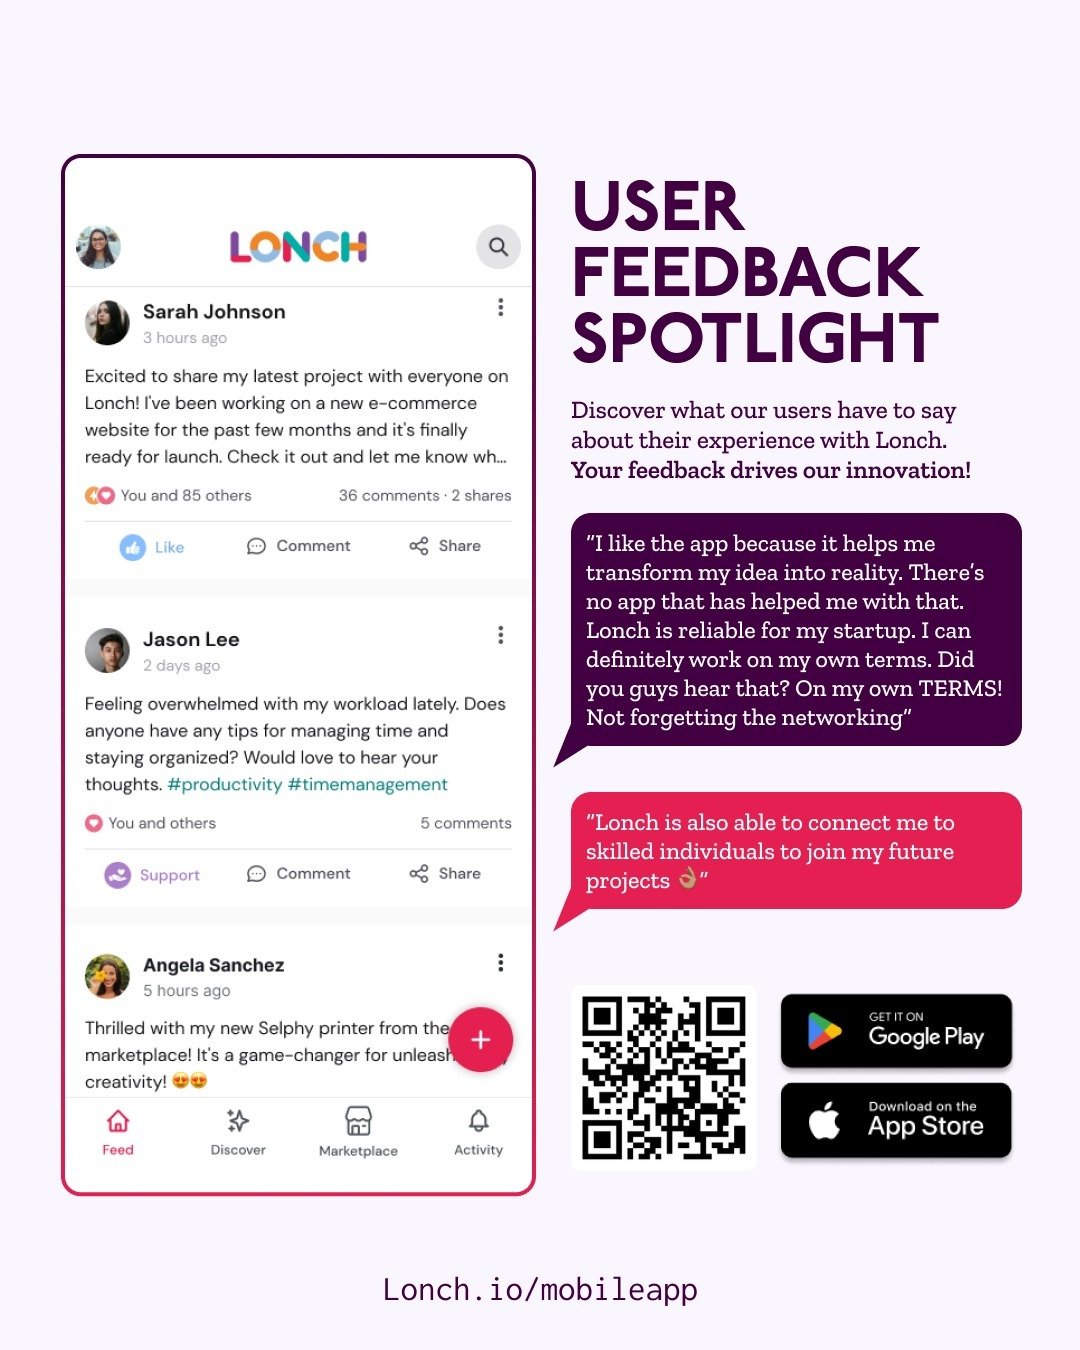 Your voice matters! 

We love hearing from our amazing Lonch community. Your feedback helps us shape the future of our platform. 

Share your thoughts and ideas with us today, and let's make Lonch even better together! 💬 

#Feedback
#LonchCommunity 